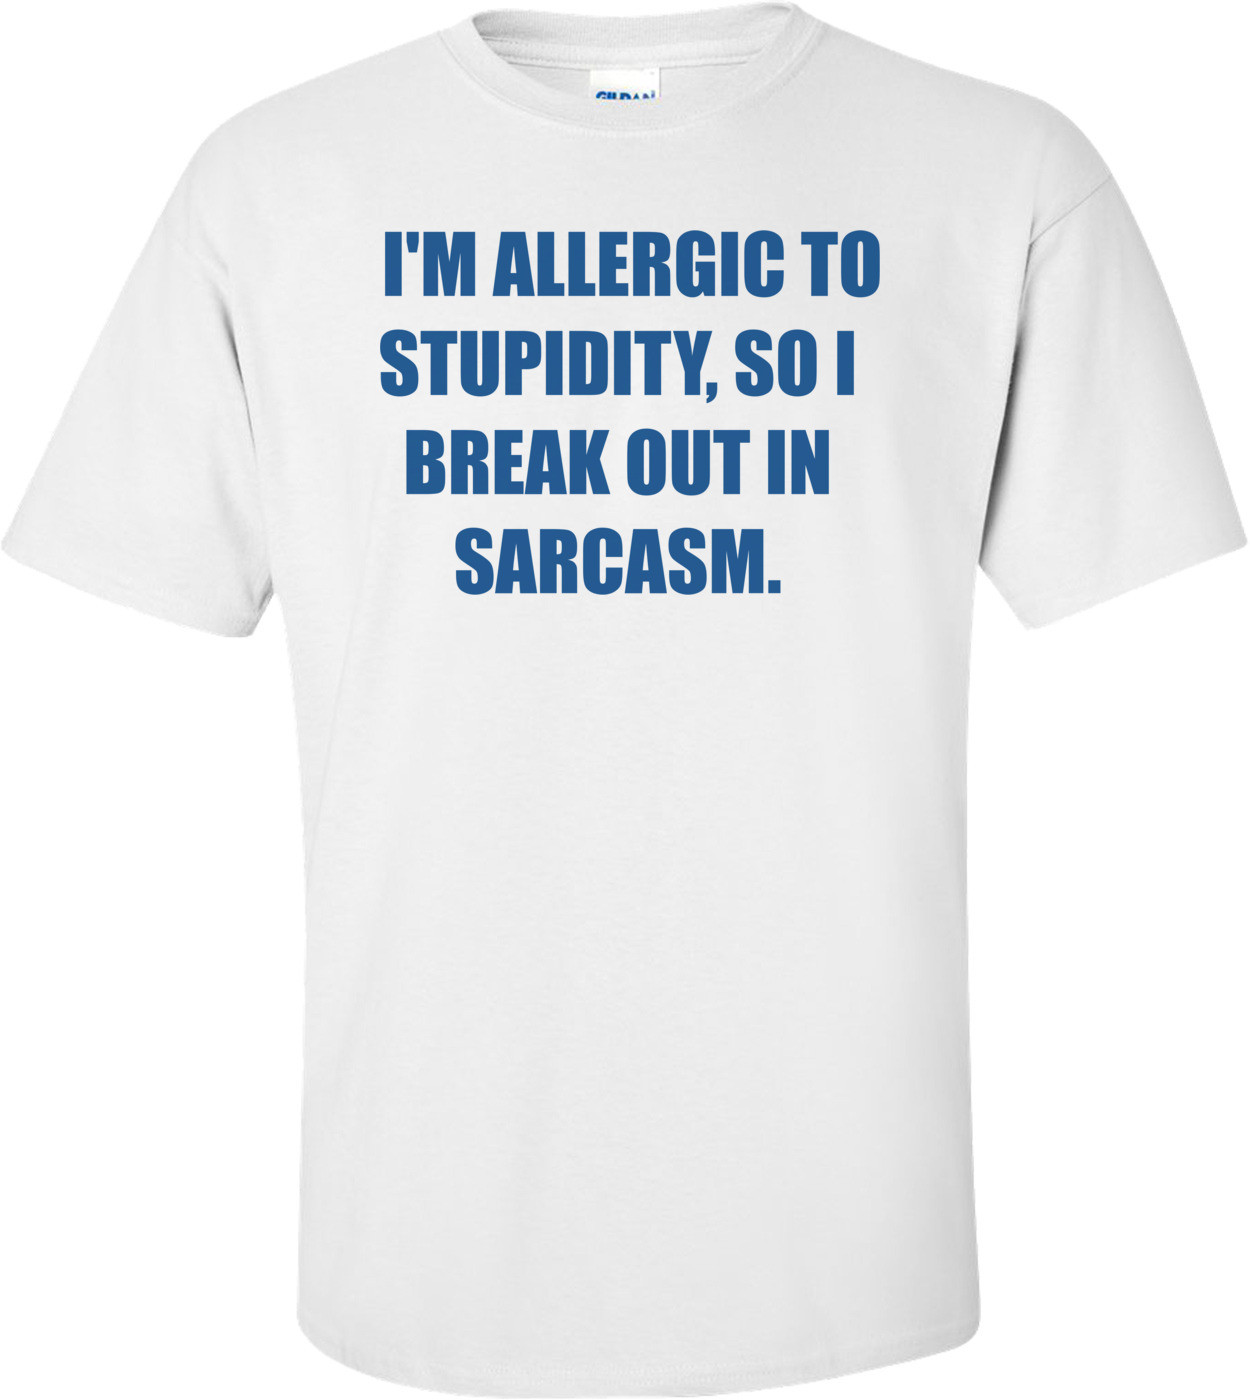   I'M ALLERGIC TO STUPIDITY, SO I BREAK OUT IN SARCASM.